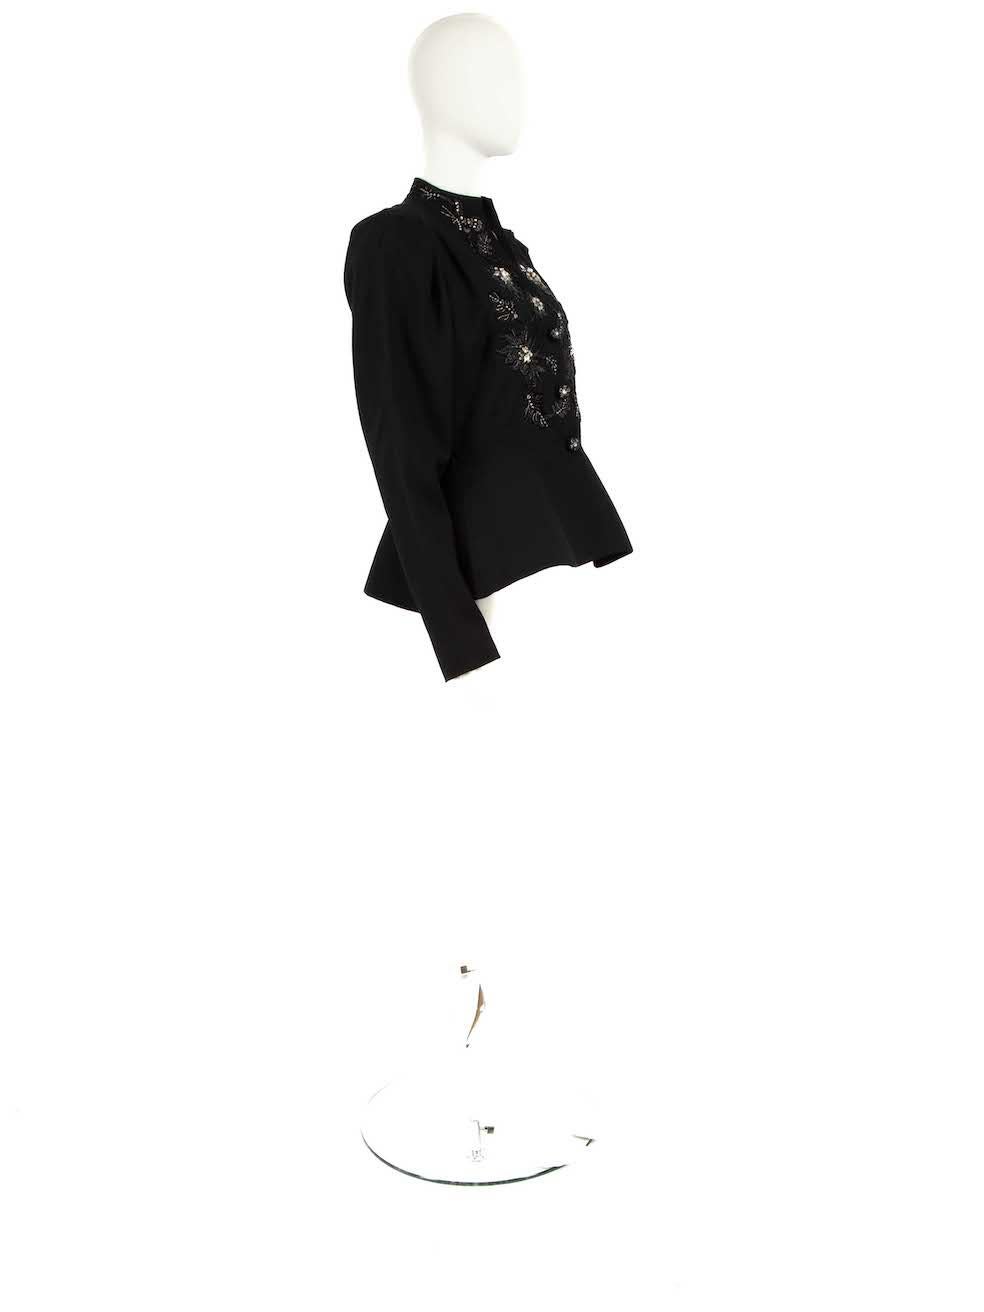 CONDITION is Very good. Hardly any visible wear to jacket is evident, however the belt is missing on this used Dior designer resale item.
 
 Details
 Vintage
 Black
 Synthetic
 Peplum jacket
 Floral beaded embellishment
 Front snap buttons closure
